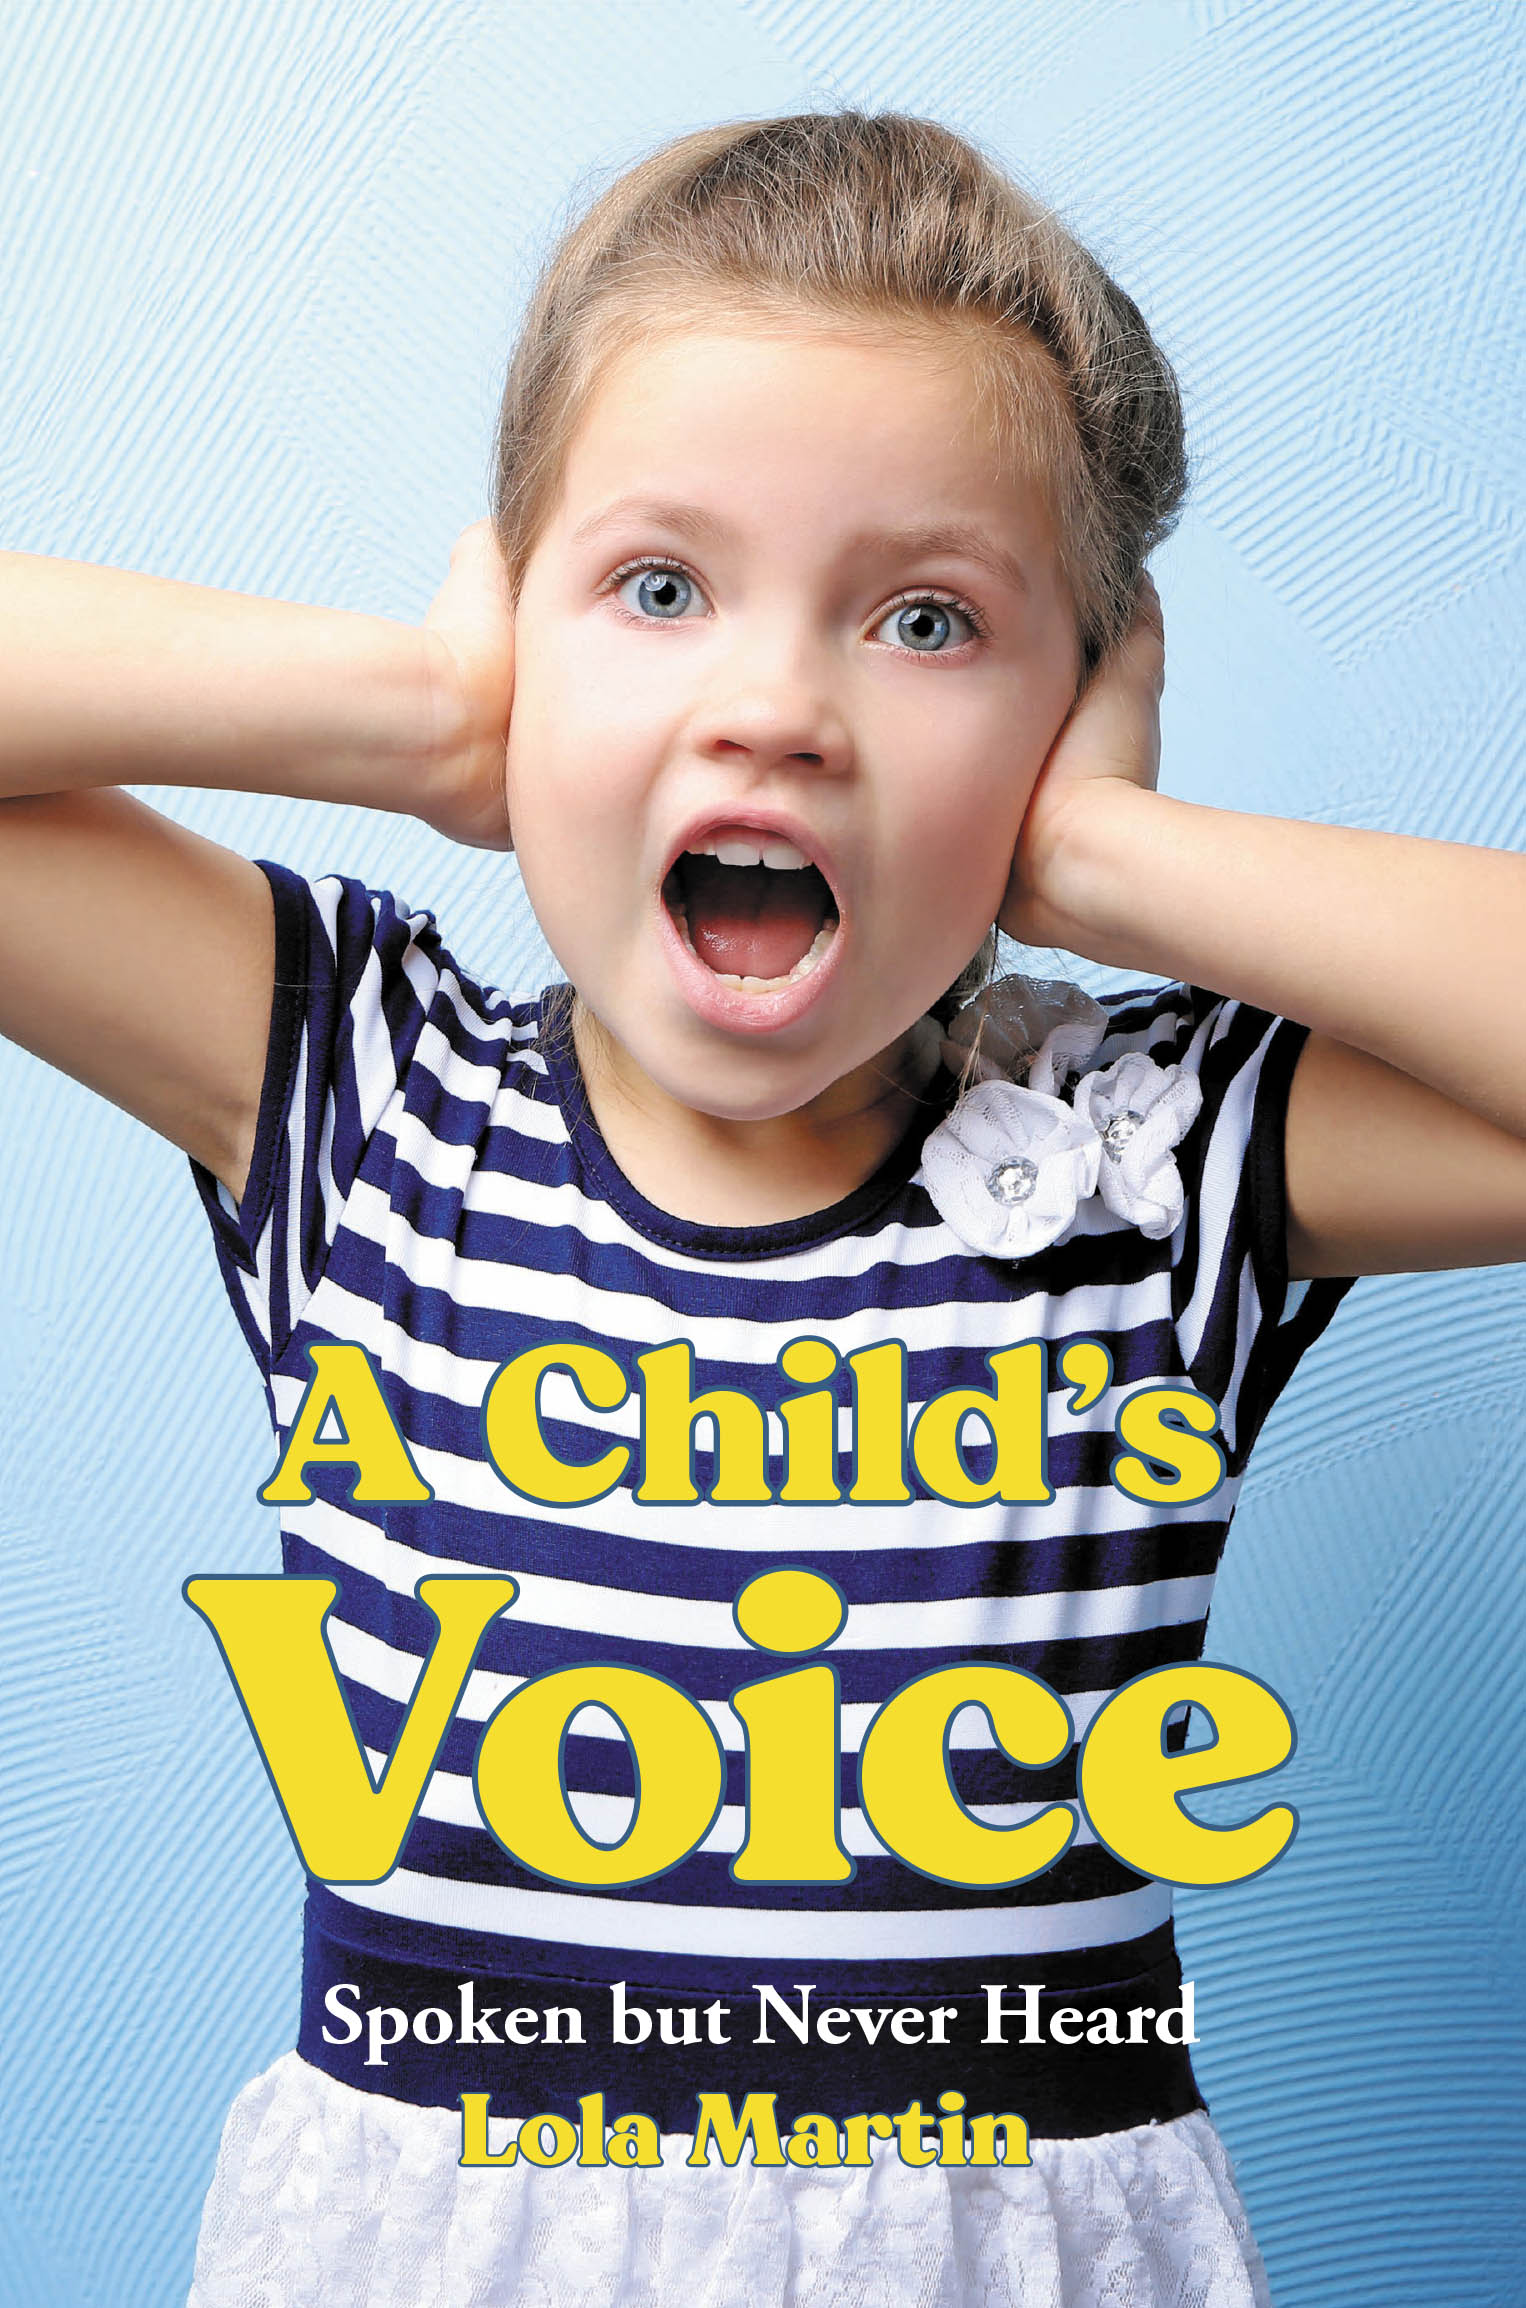 Author Lola Martin’s New Book, "A Child's Voice: Spoken But Never Heard," is a Deeply Emotional Tale Revealing the Truth About the Abuse Her Family Members Endured